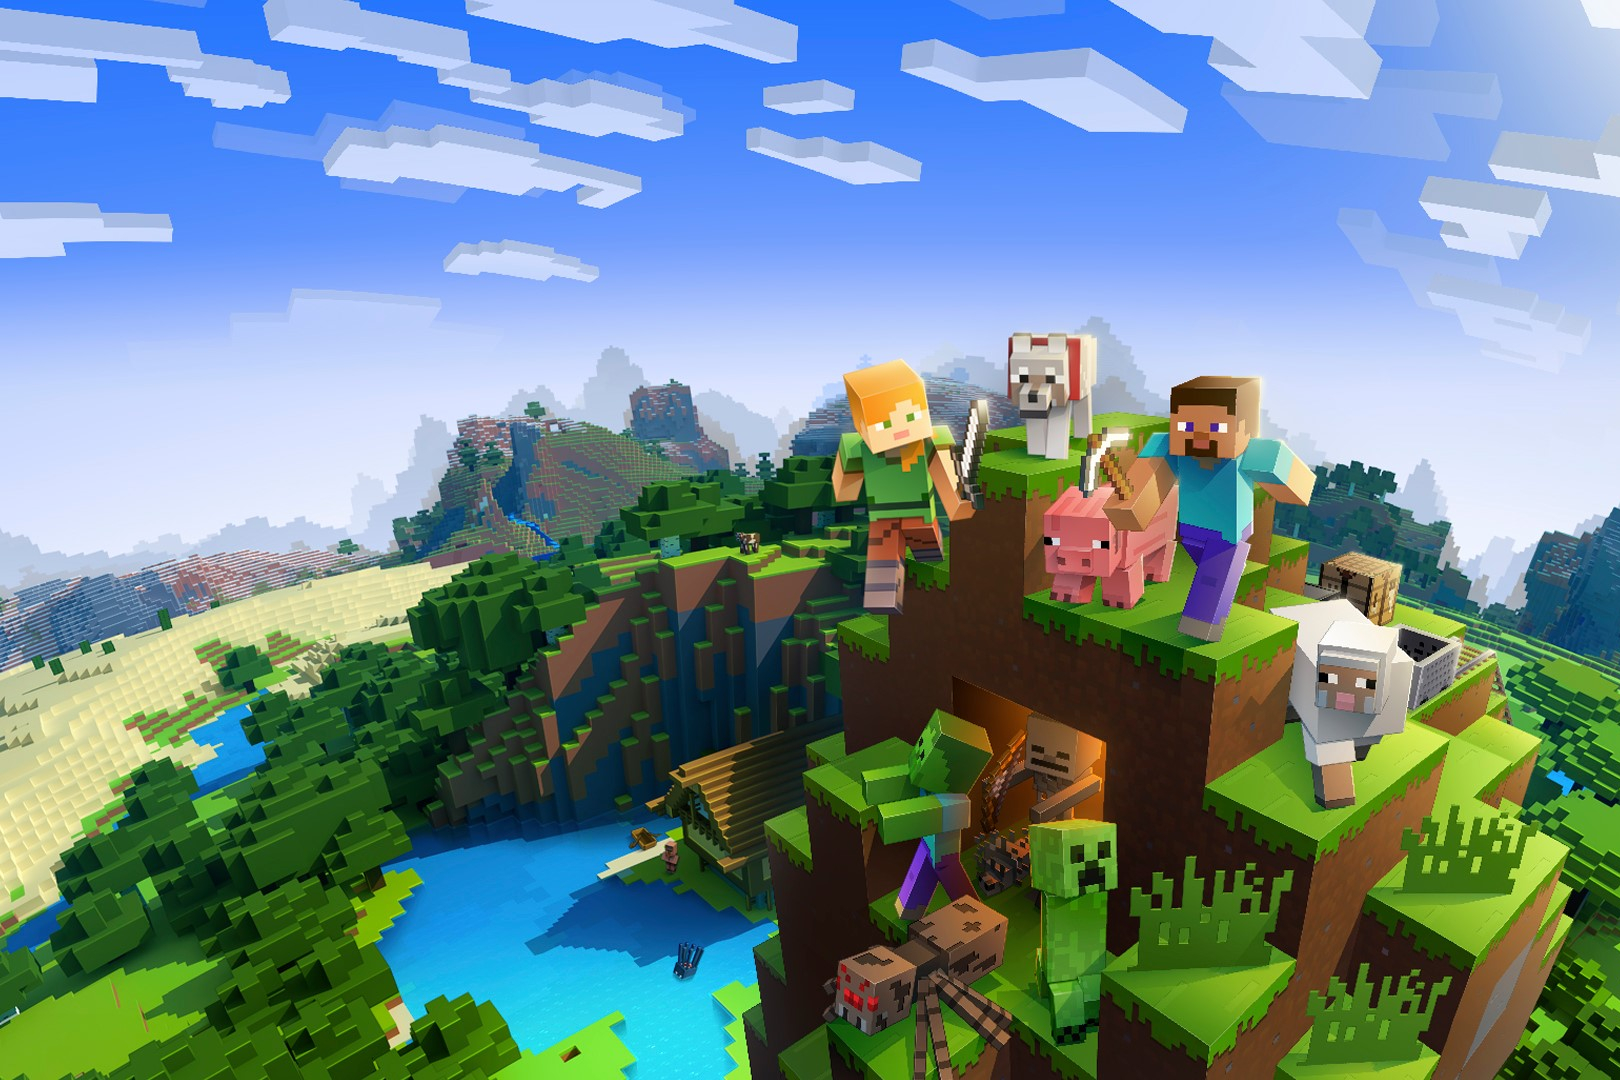 Google Play on X: Create, build, and explore an epic world. Download  Minecraft on Google Play. / X